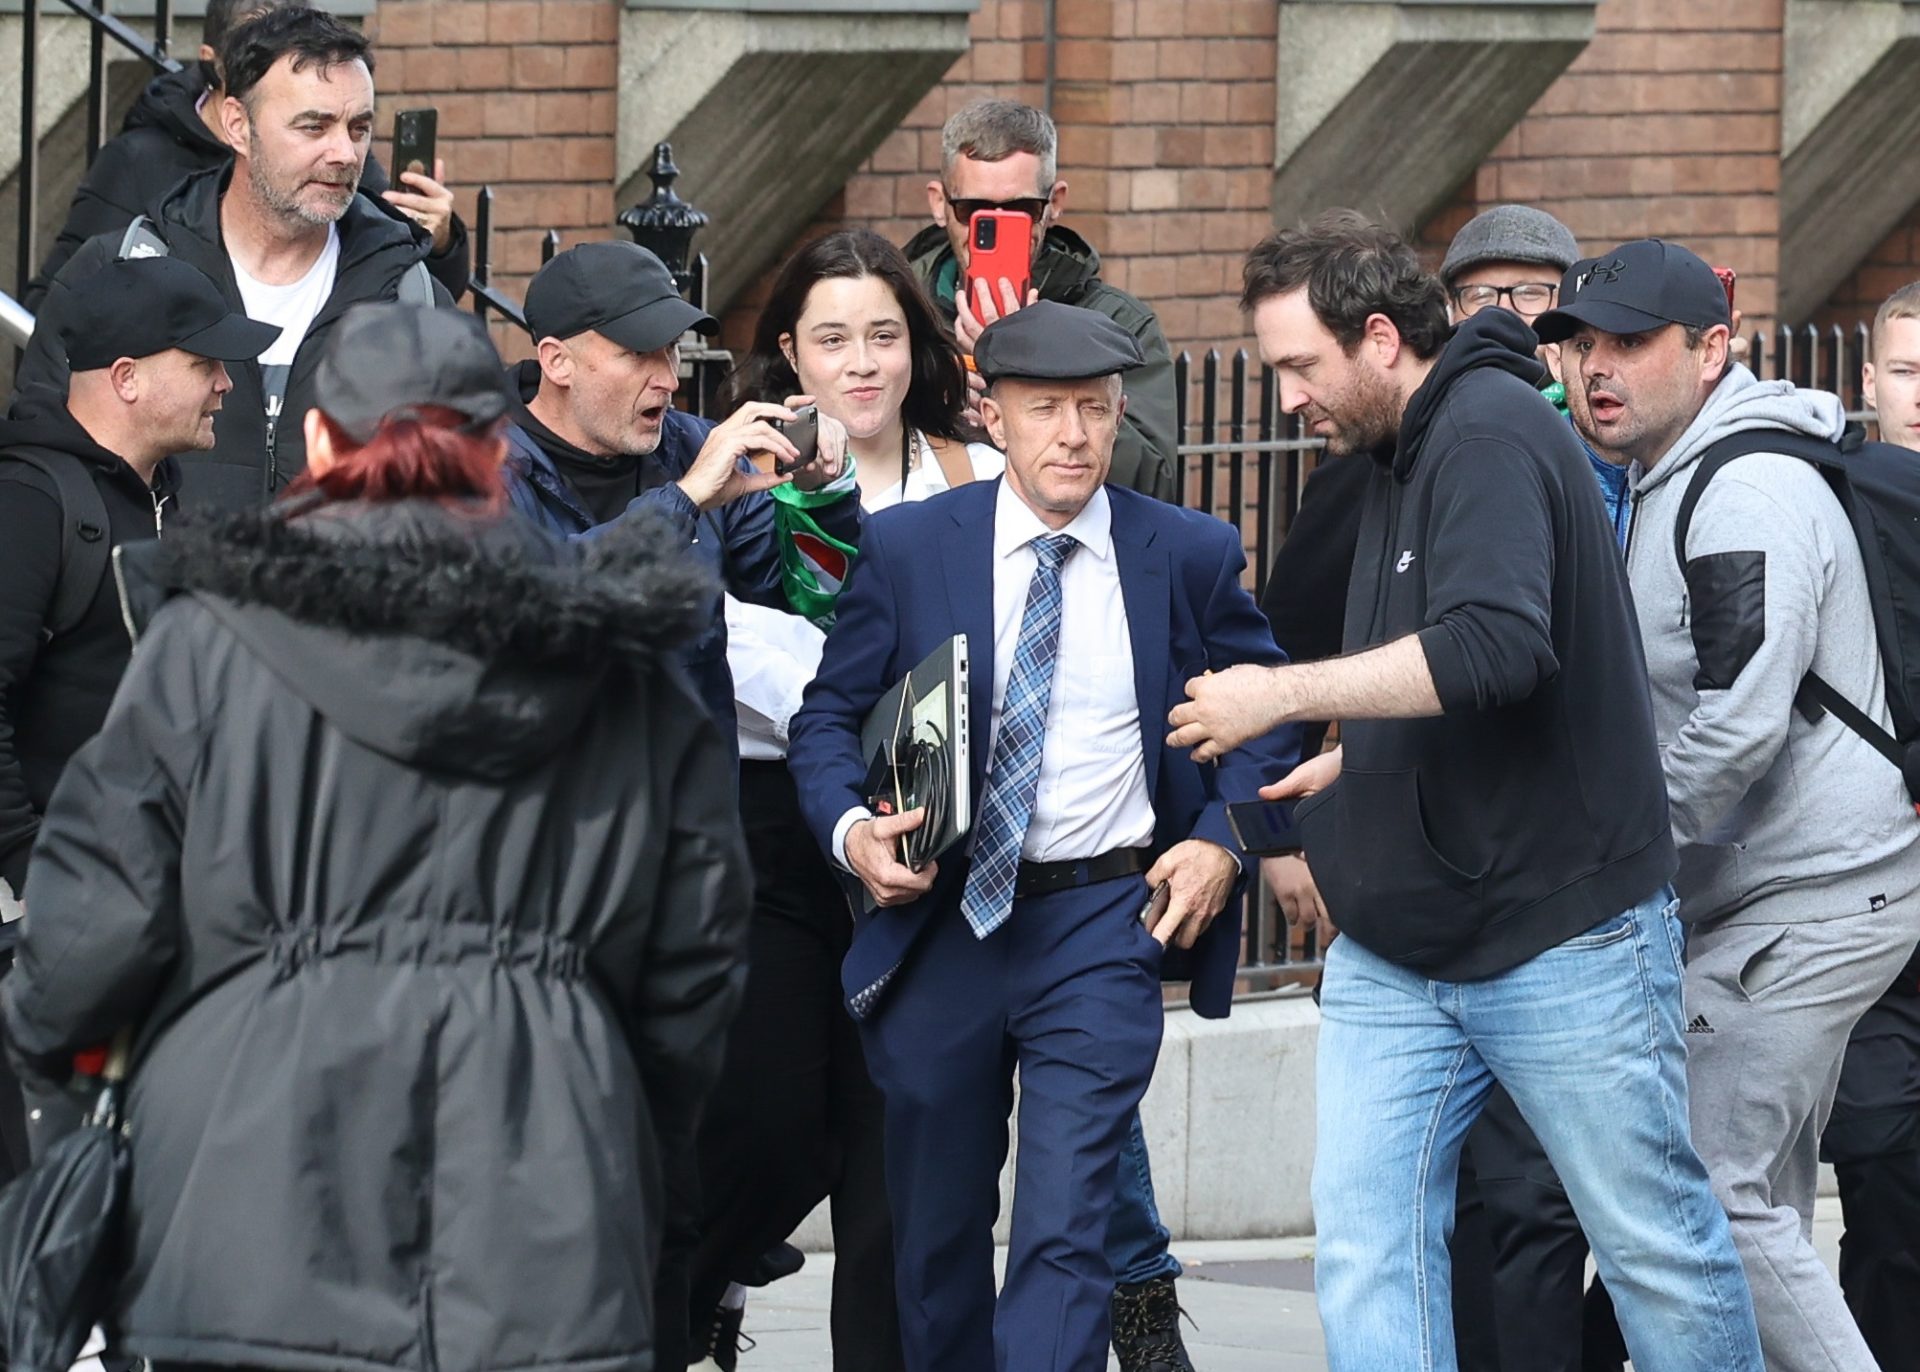 TD Michael Healy-Rae and his assistant are surrounded by protestors as he enters Leinster House